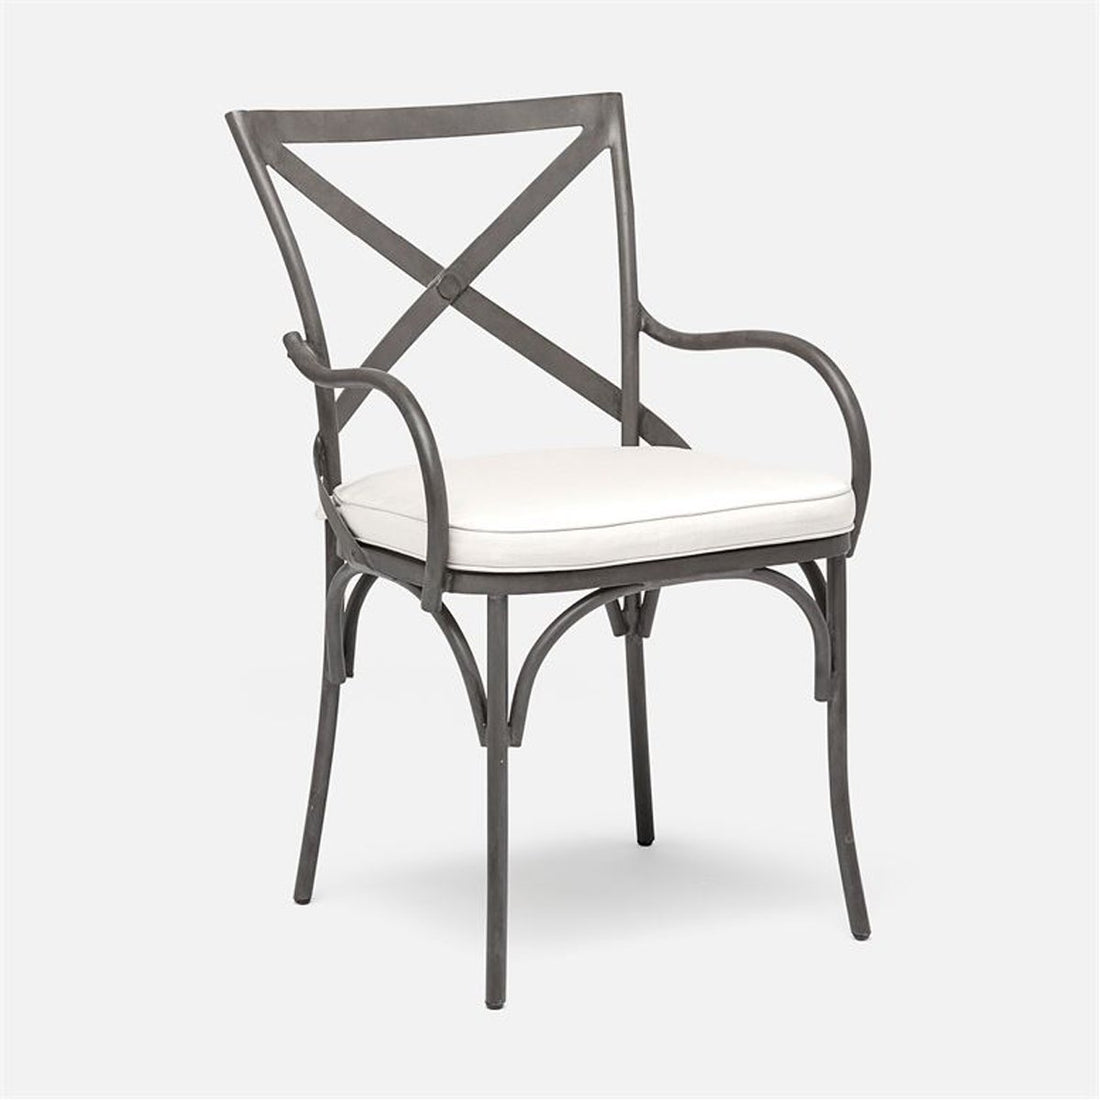 Made Goods Beverly Metal X-Back Outdoor Chair, Garonne Marine Leather